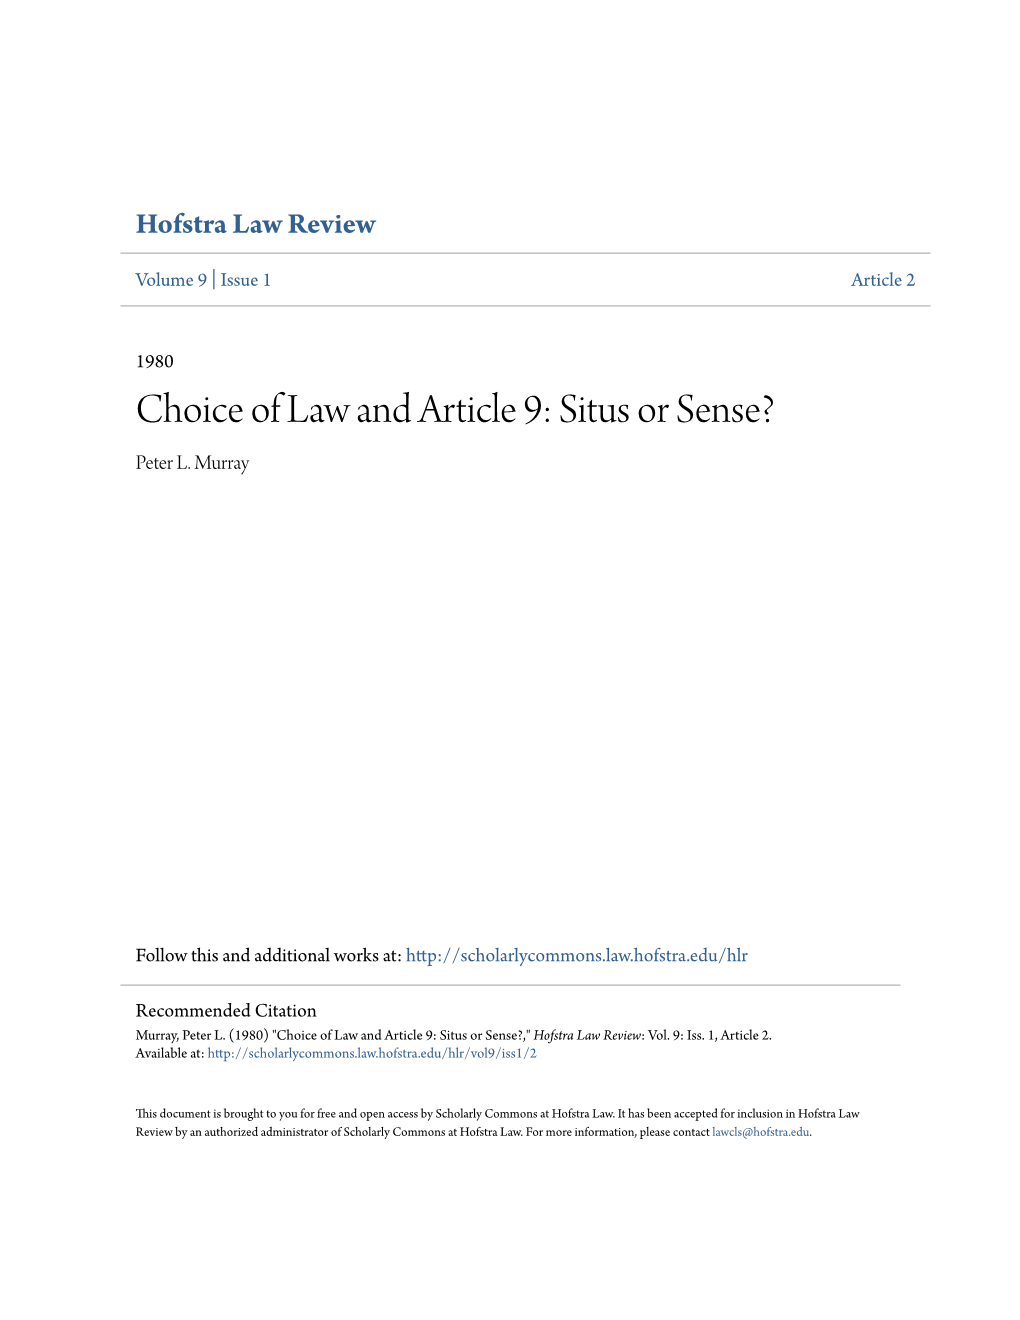 Choice of Law and Article 9: Situs Or Sense? Peter L